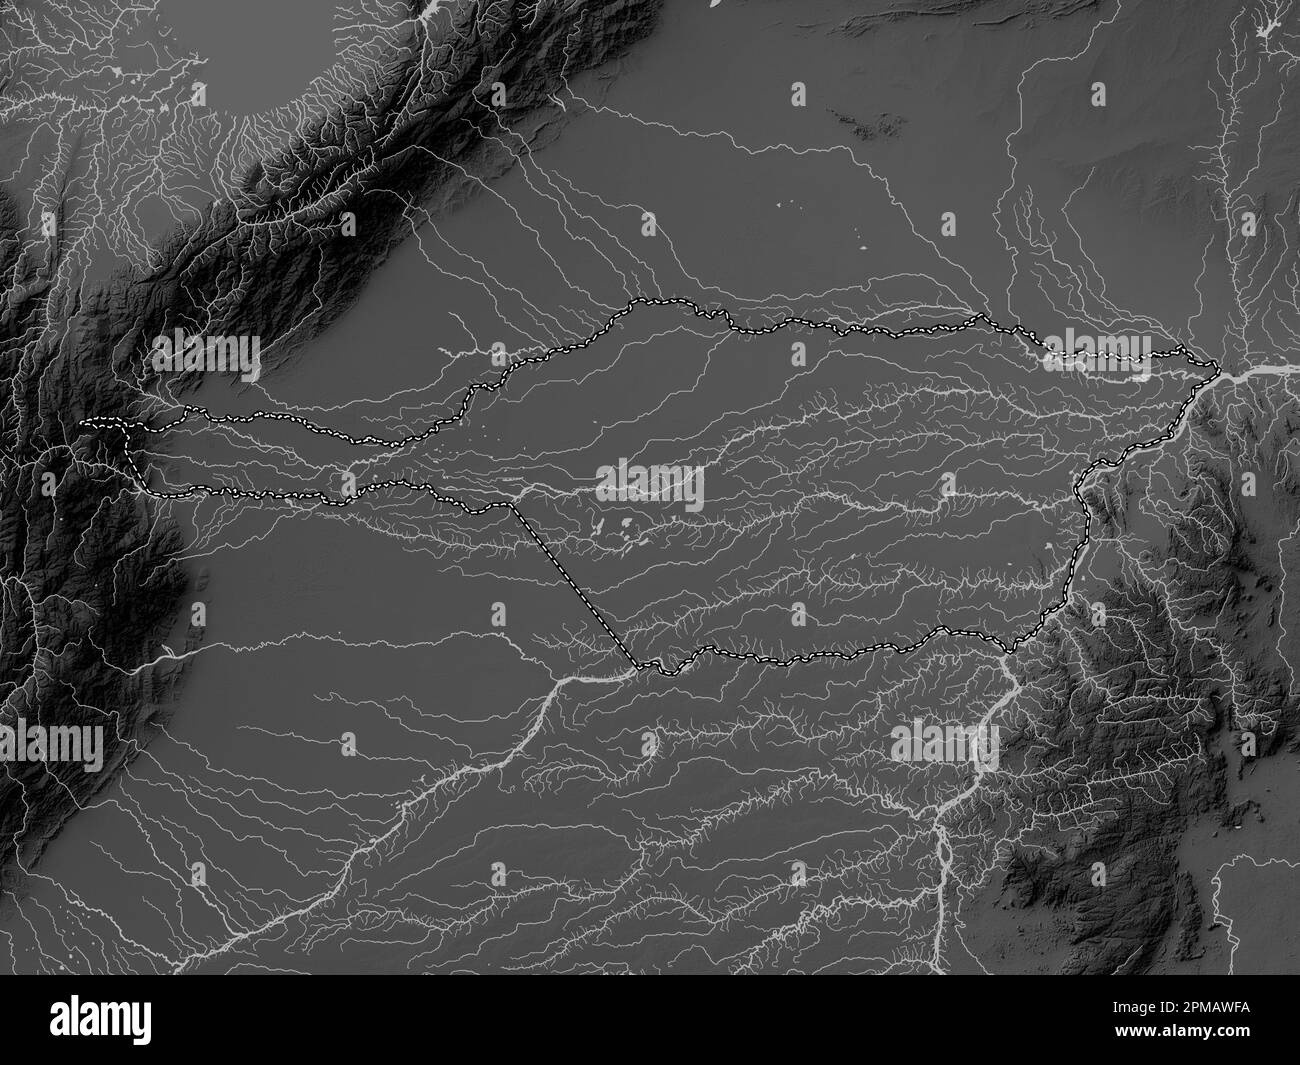 Apure, state of Venezuela. Grayscale elevation map with lakes and rivers Stock Photo